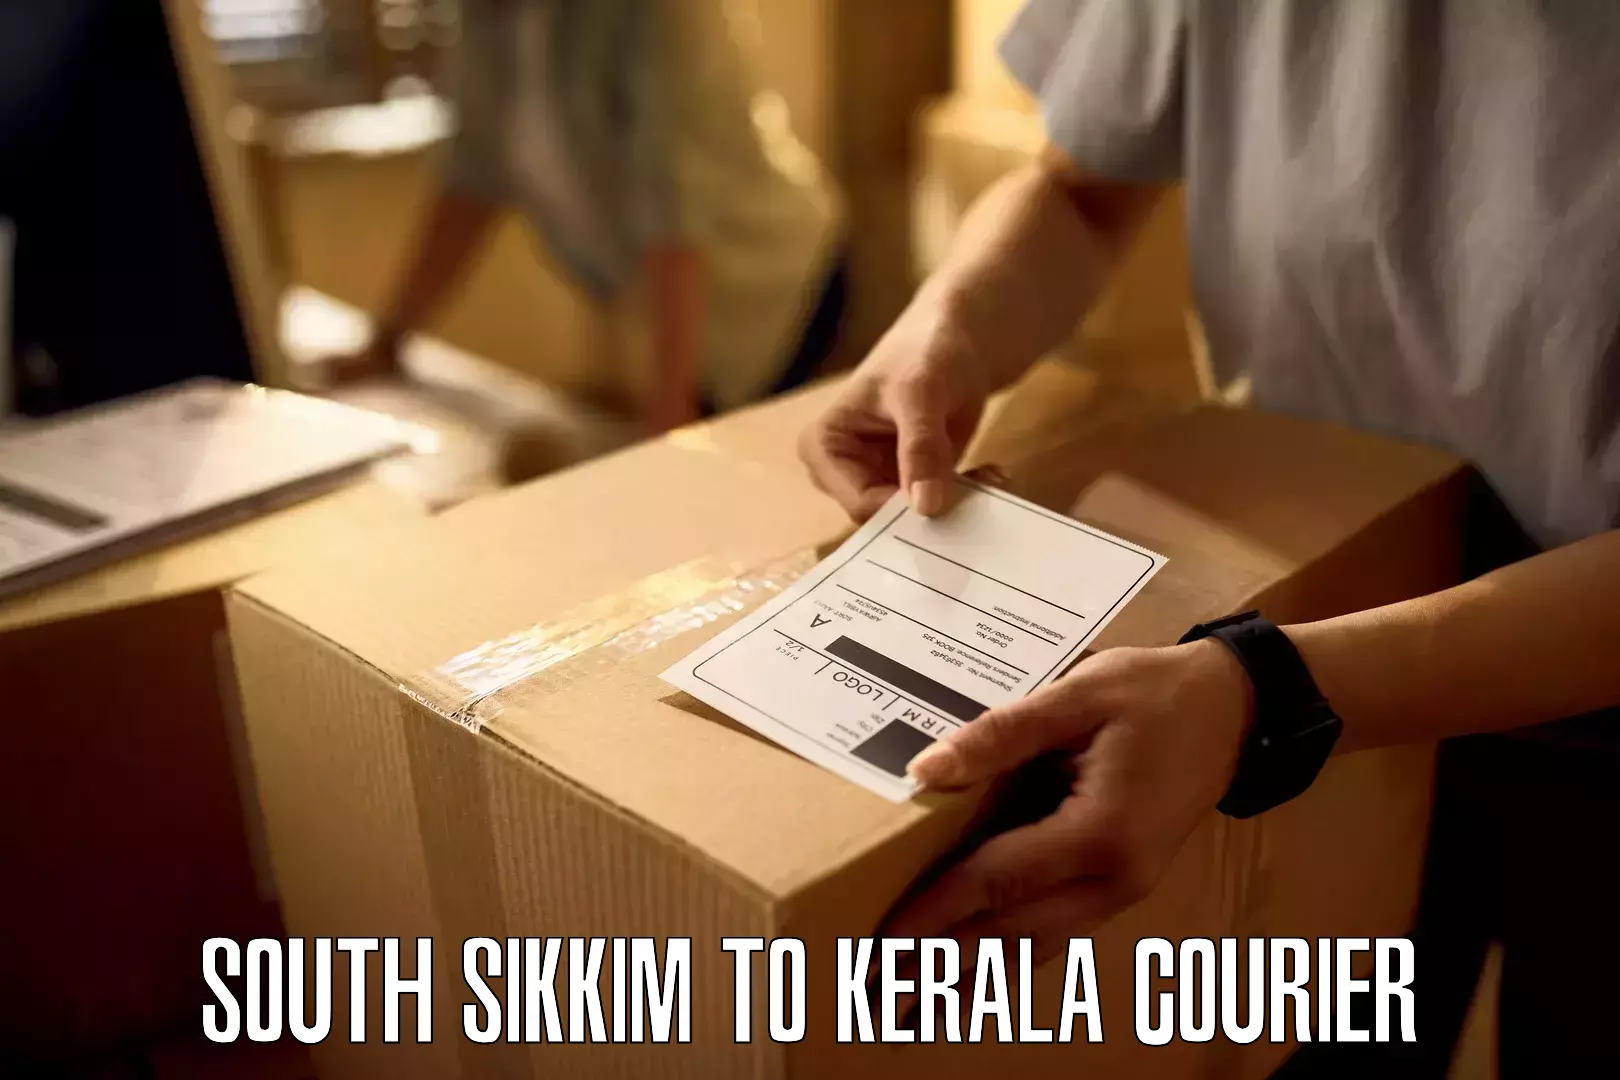 Digital courier platforms South Sikkim to Cochin